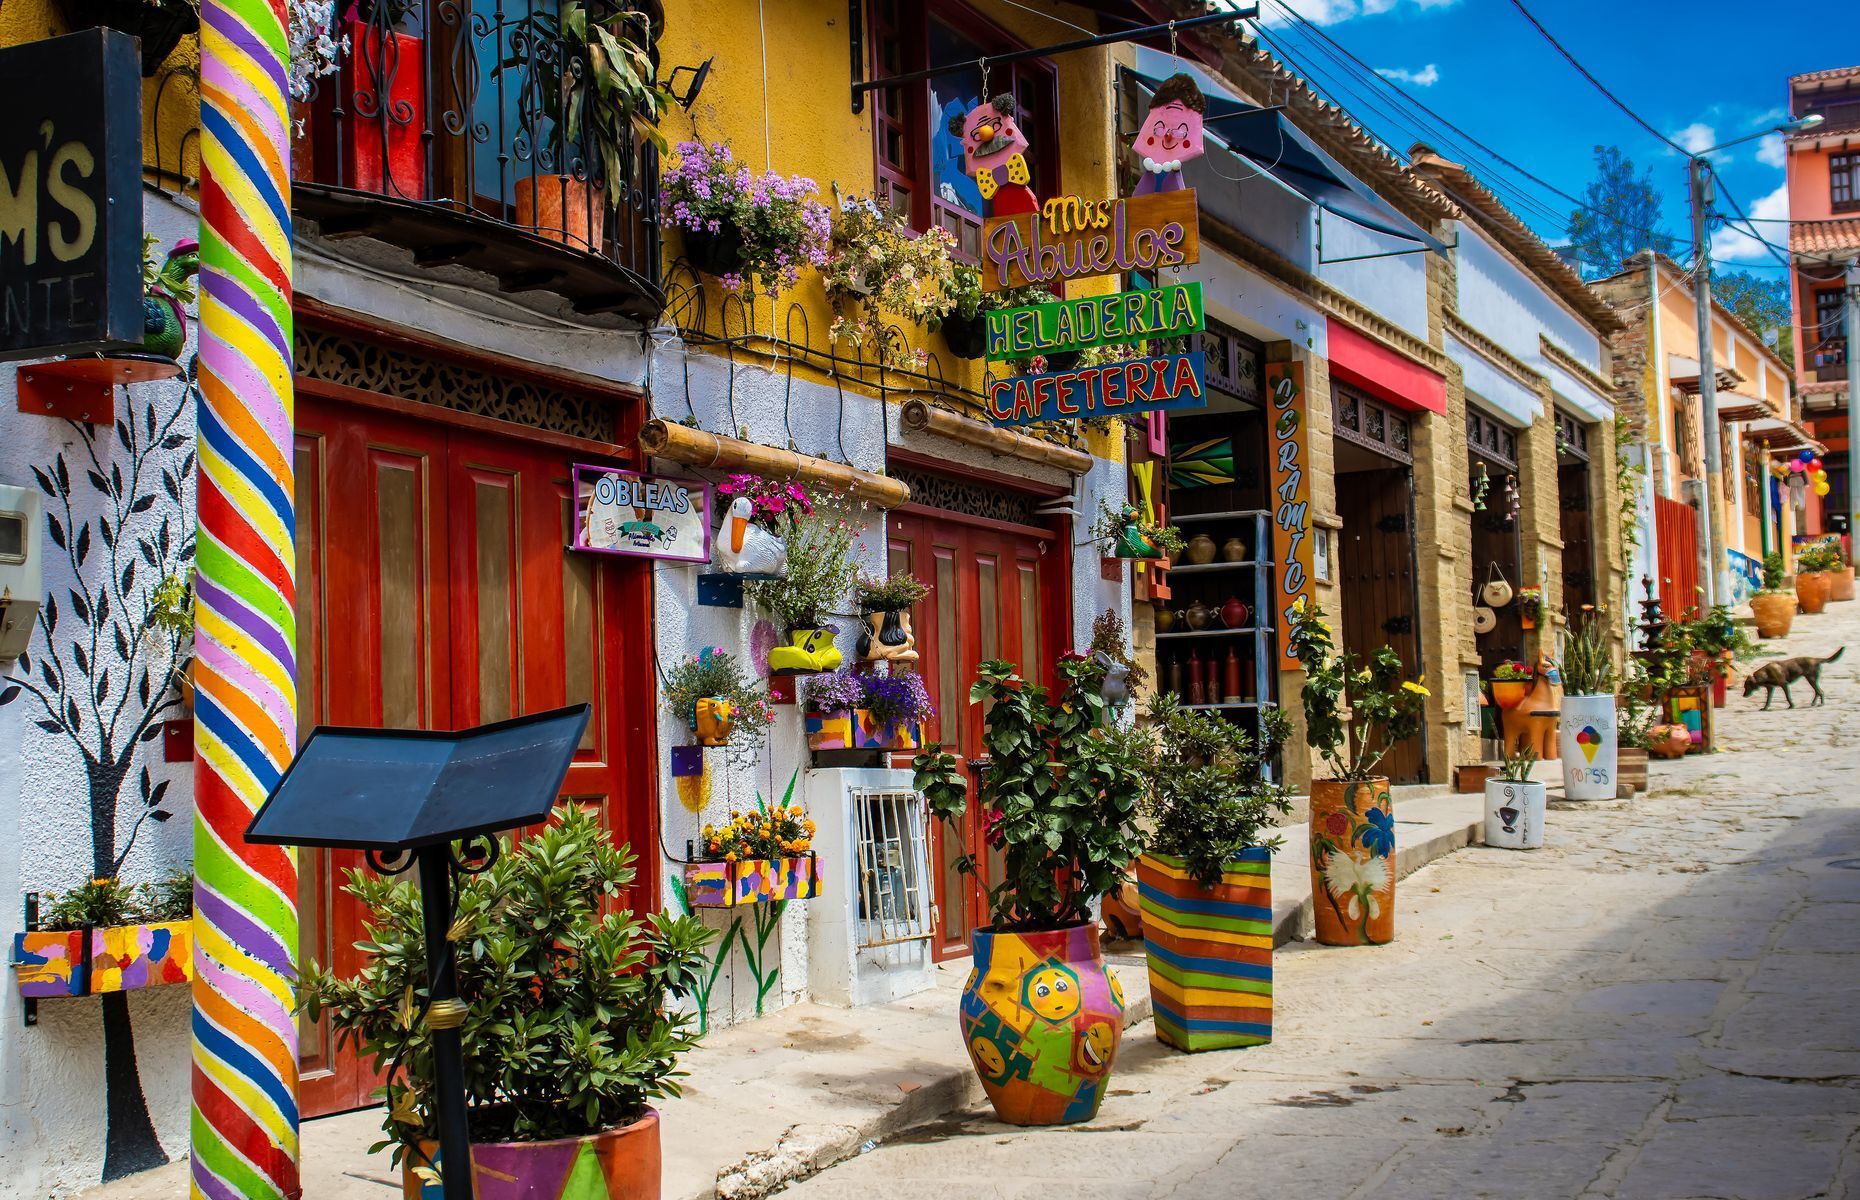 Not far from Villa de Leyva sits <a href="https://colombiatravelreporter.com/raquira-the-pottery-capital-of-colombia/" rel="noreferrer noopener">Raquira</a>, a colourful and vibrant town known for its thriving art scene—so much so that it’s also known as the pottery capital of Colombia. Here, you can buy unique handicrafts and explore the local market to get a better feel for the Colombian culture.